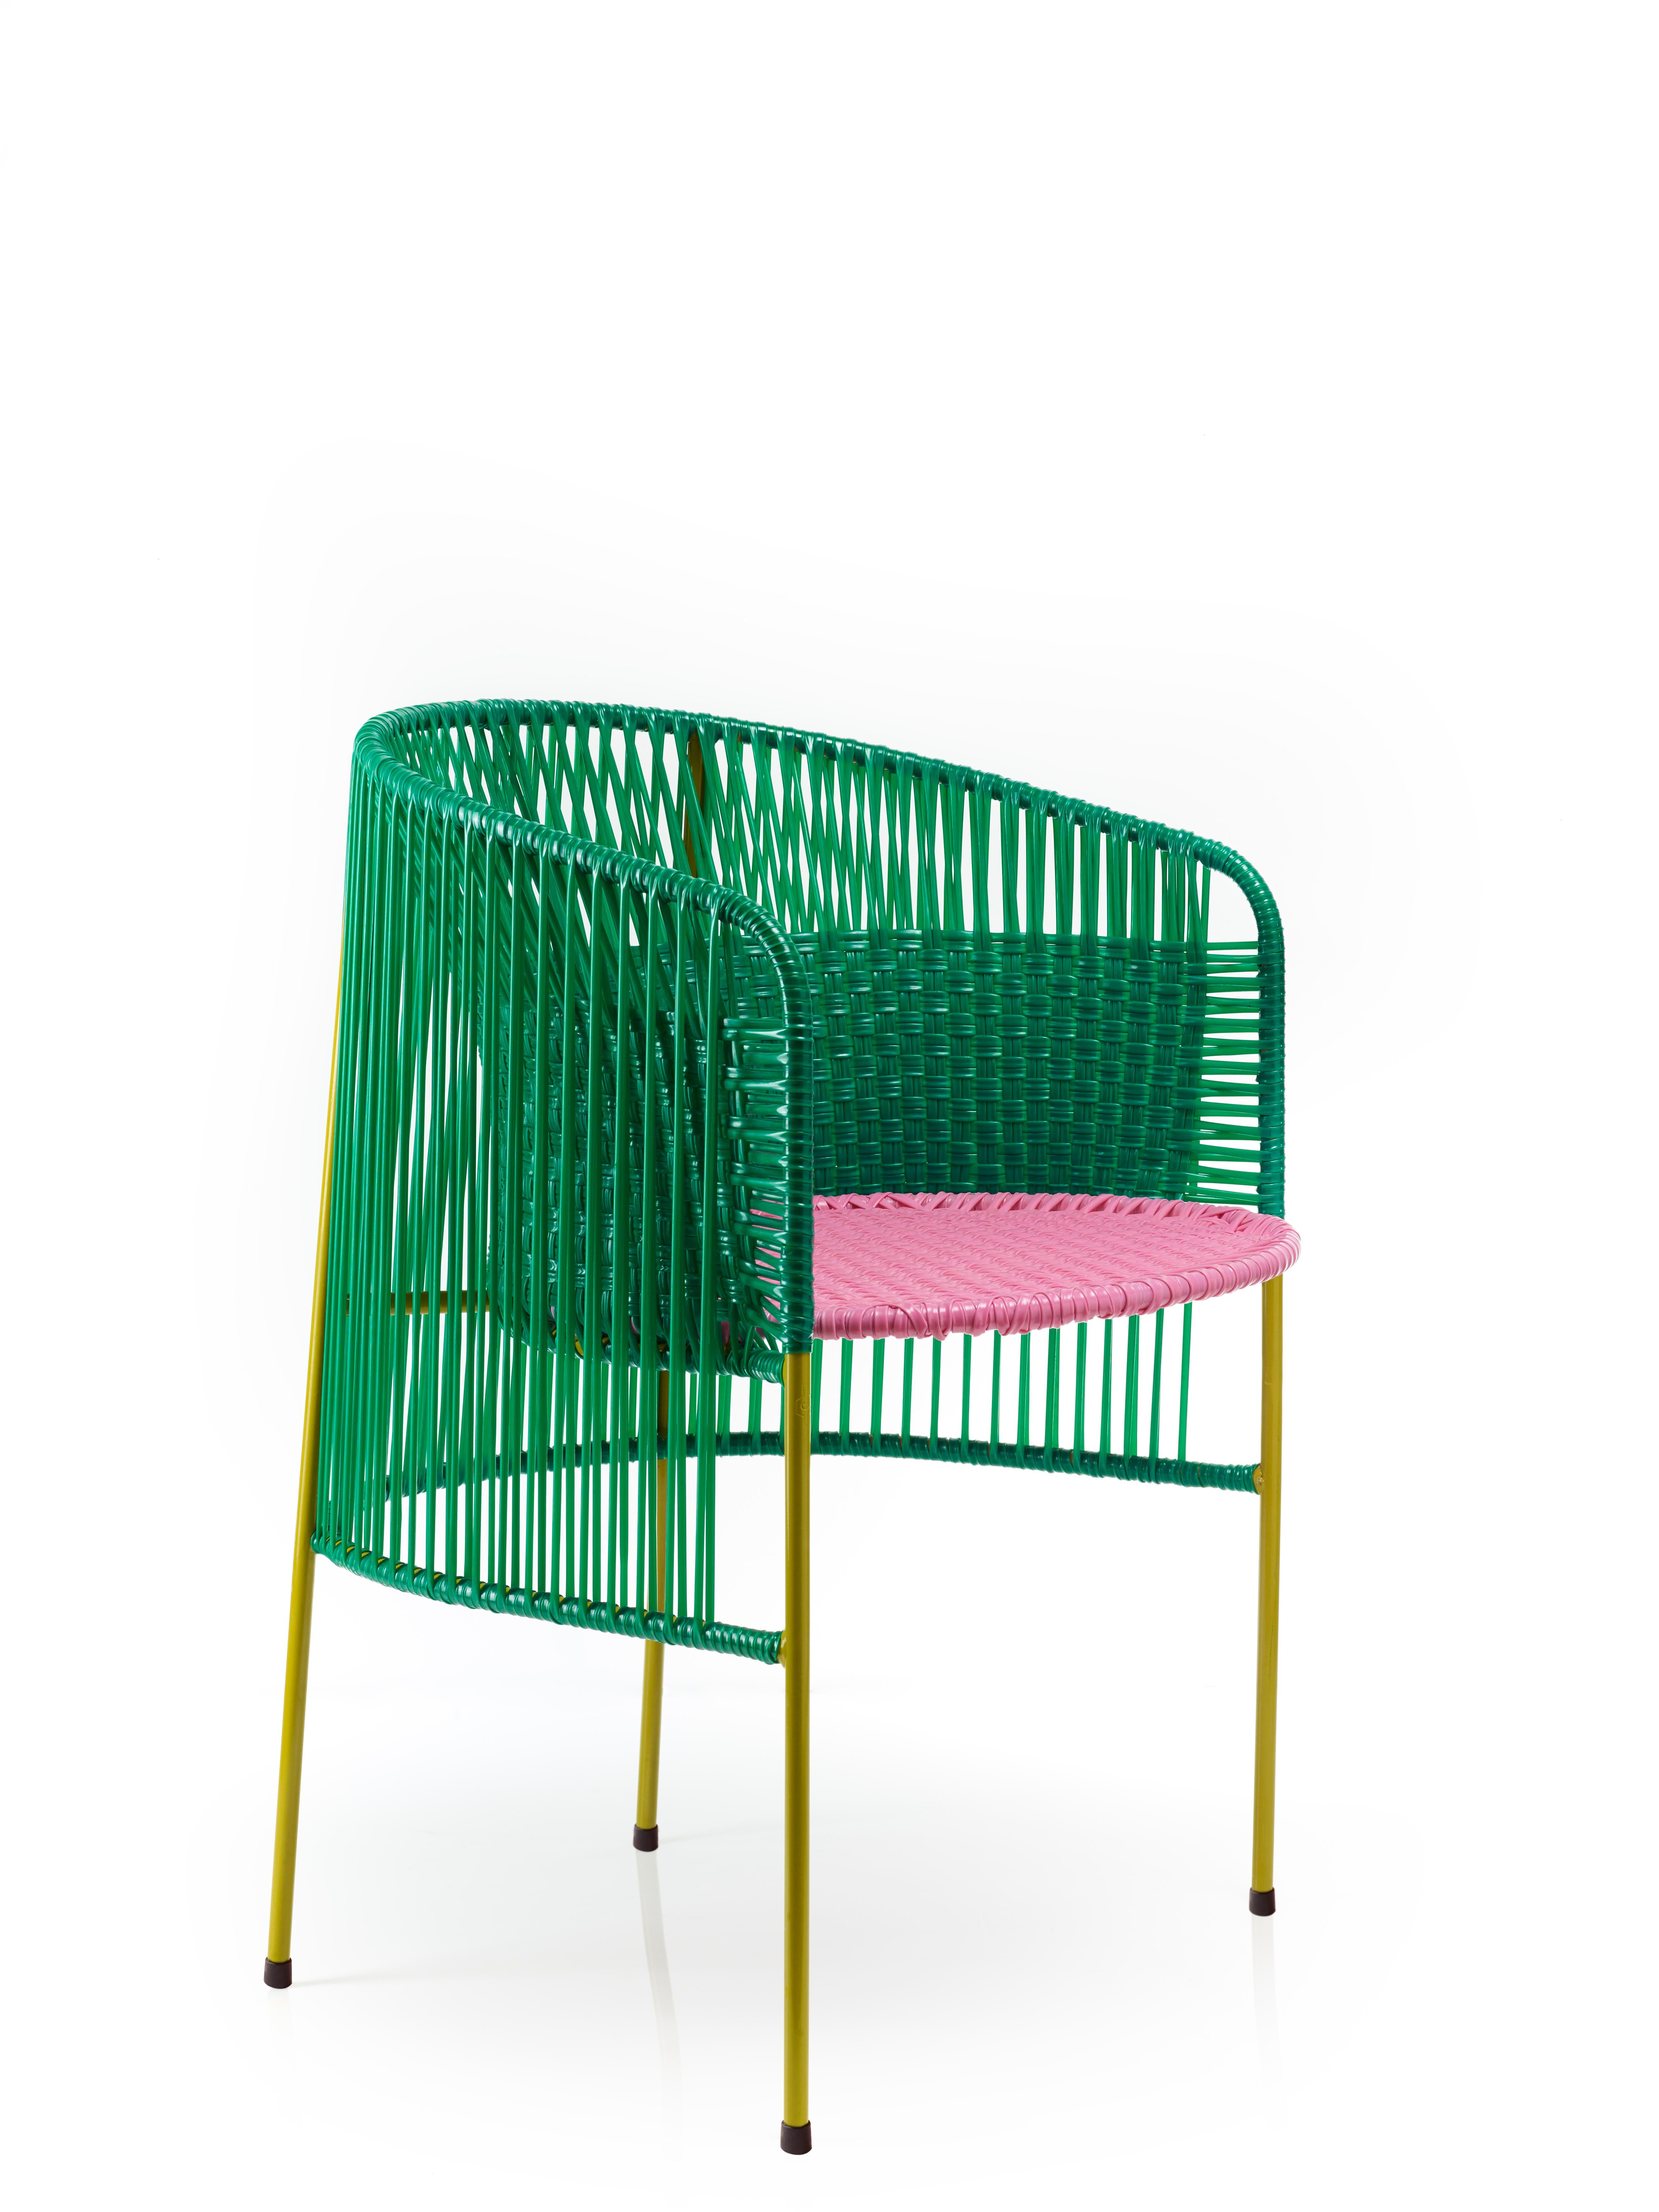 Green caribe dining chair by Sebastian Herkner
Materials: Galvanized and powder-coated tubular steel. PVC strings are made from recycled plastic.
Technique: Made from recycled plastic and weaved by local craftspeople in Colombia. 
Dimensions: W